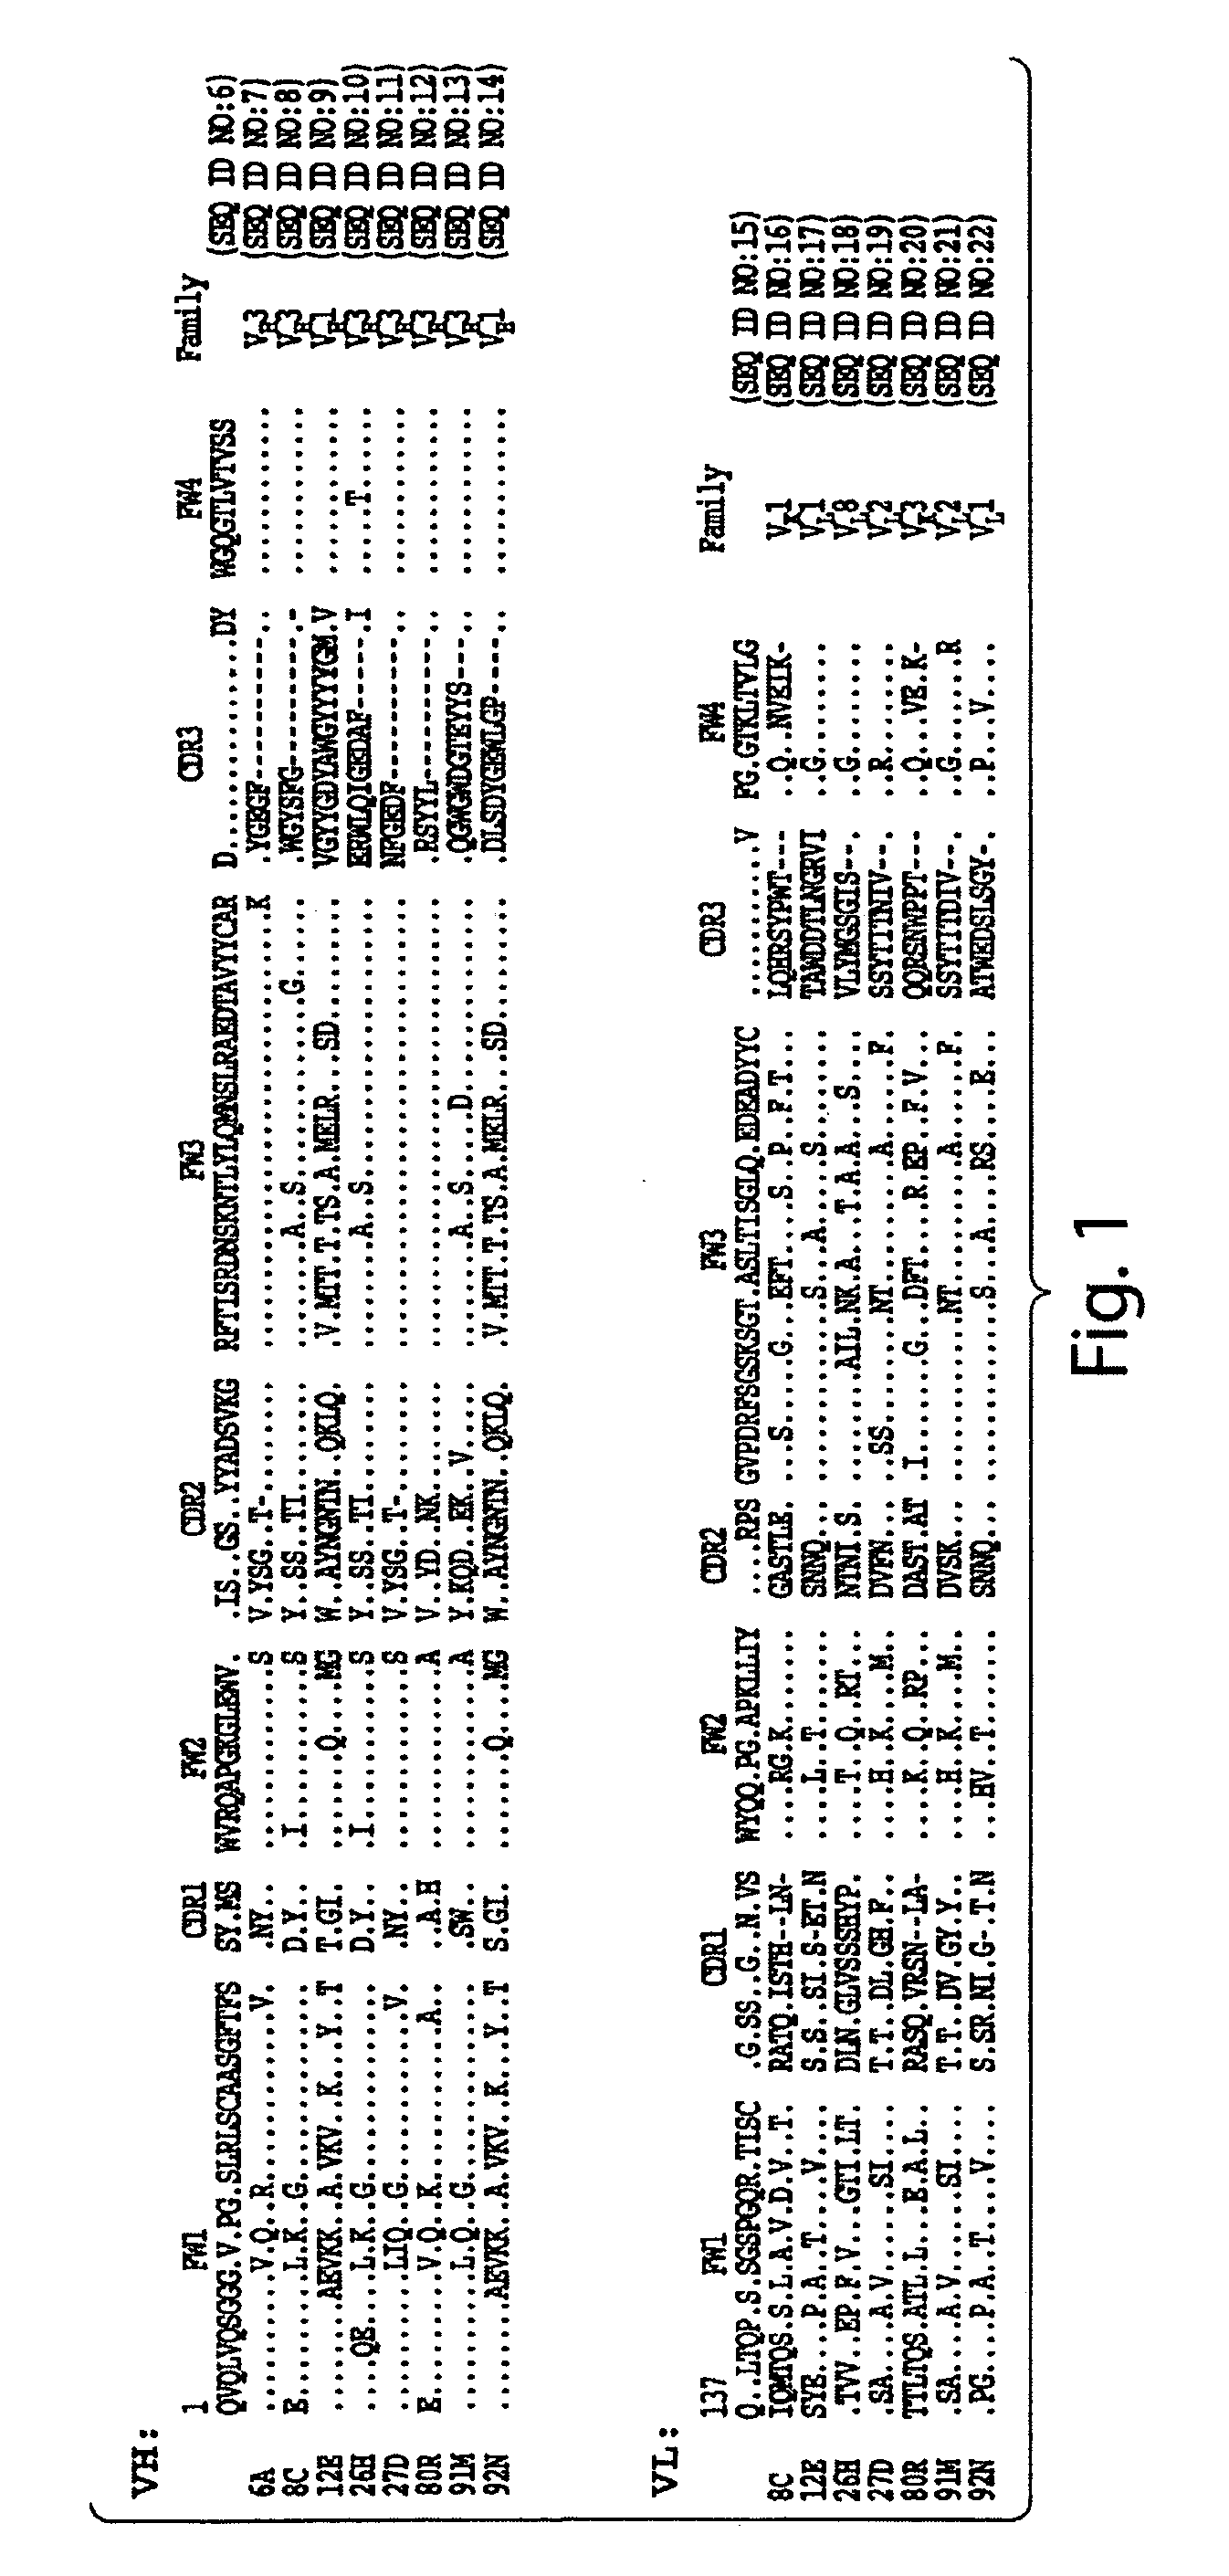 Antibodies against SARS-CoV and methods of use thereof